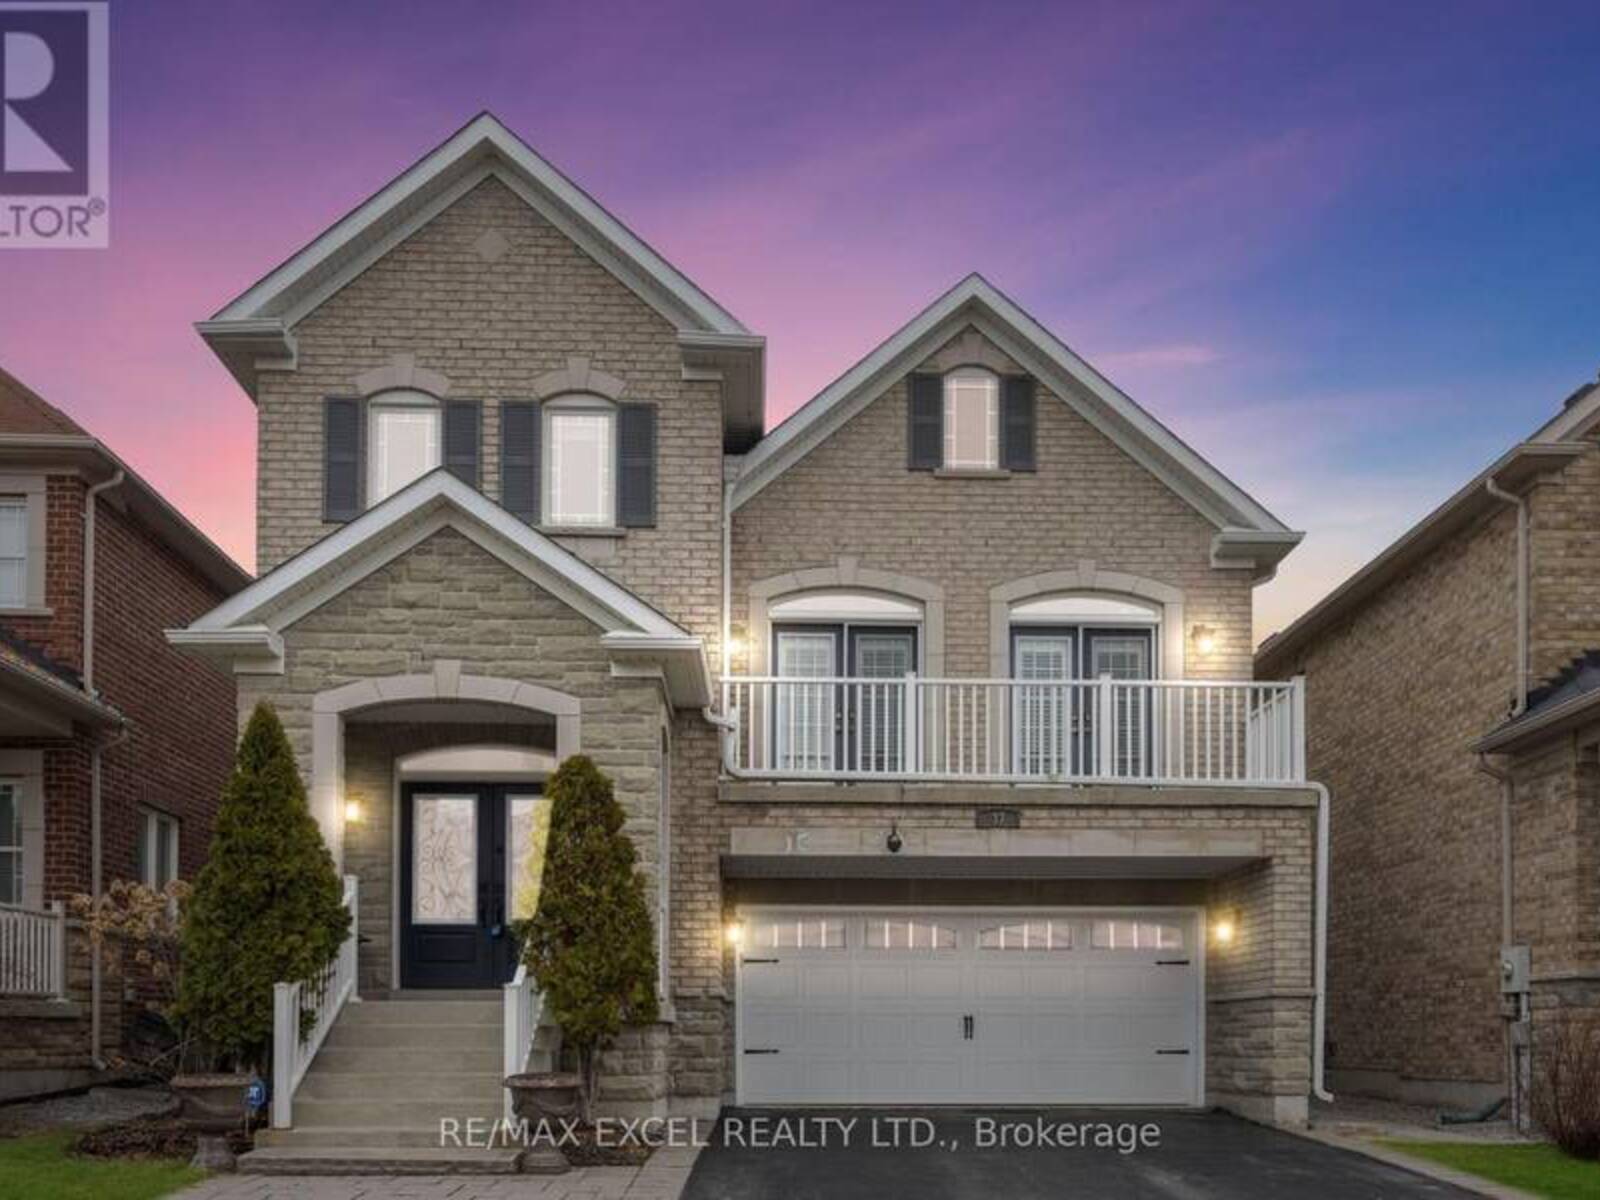 37 BIGELOW RD, Whitchurch-Stouffville, Ontario L4A 0W3